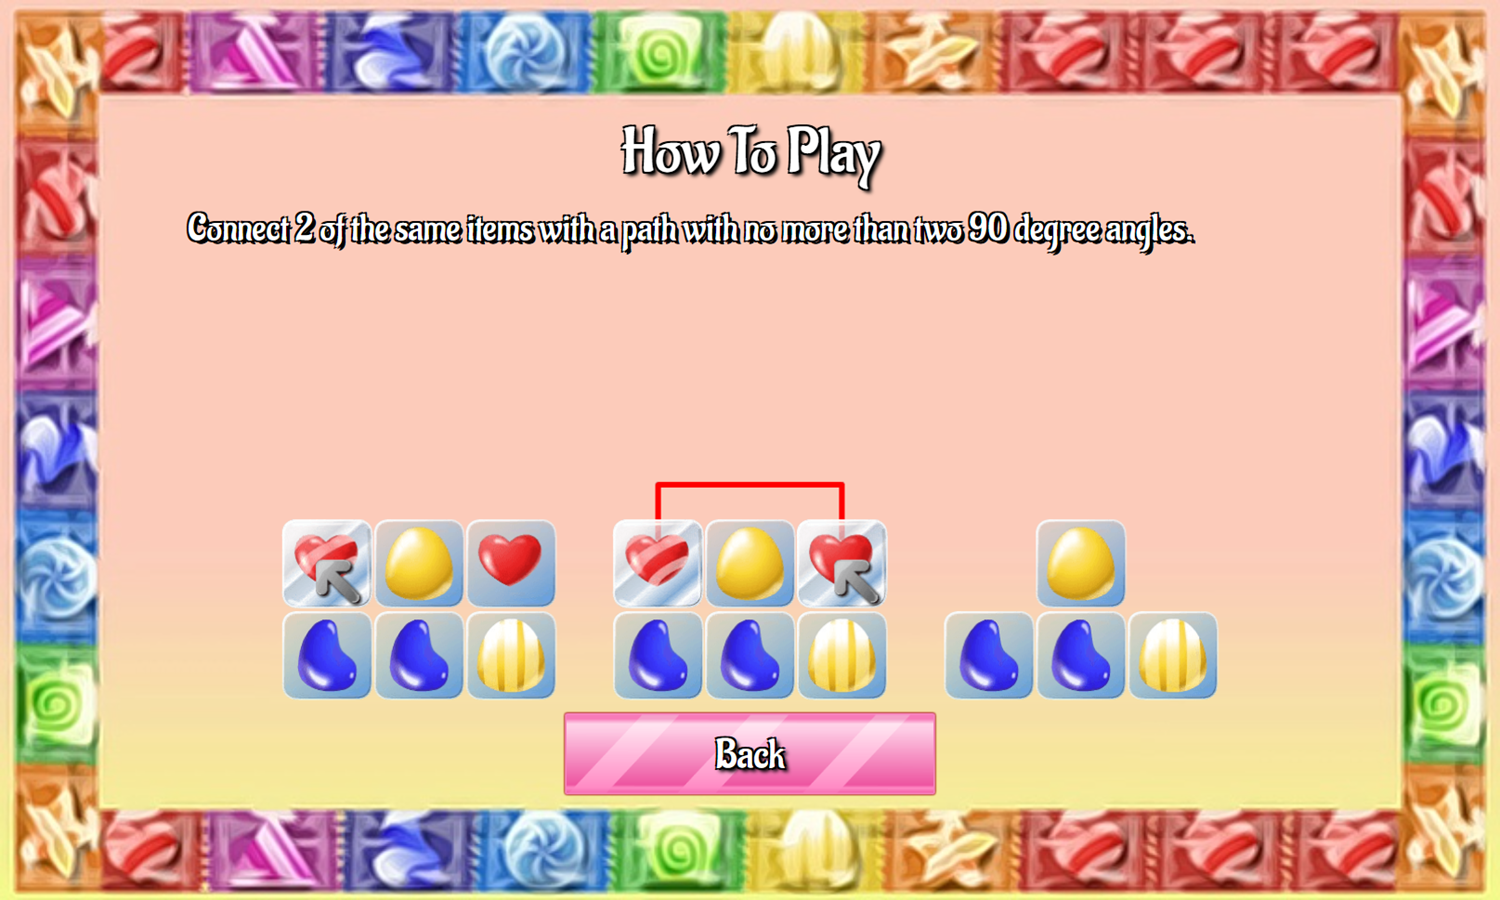 Candy Connect Game How To Play Screenshot.